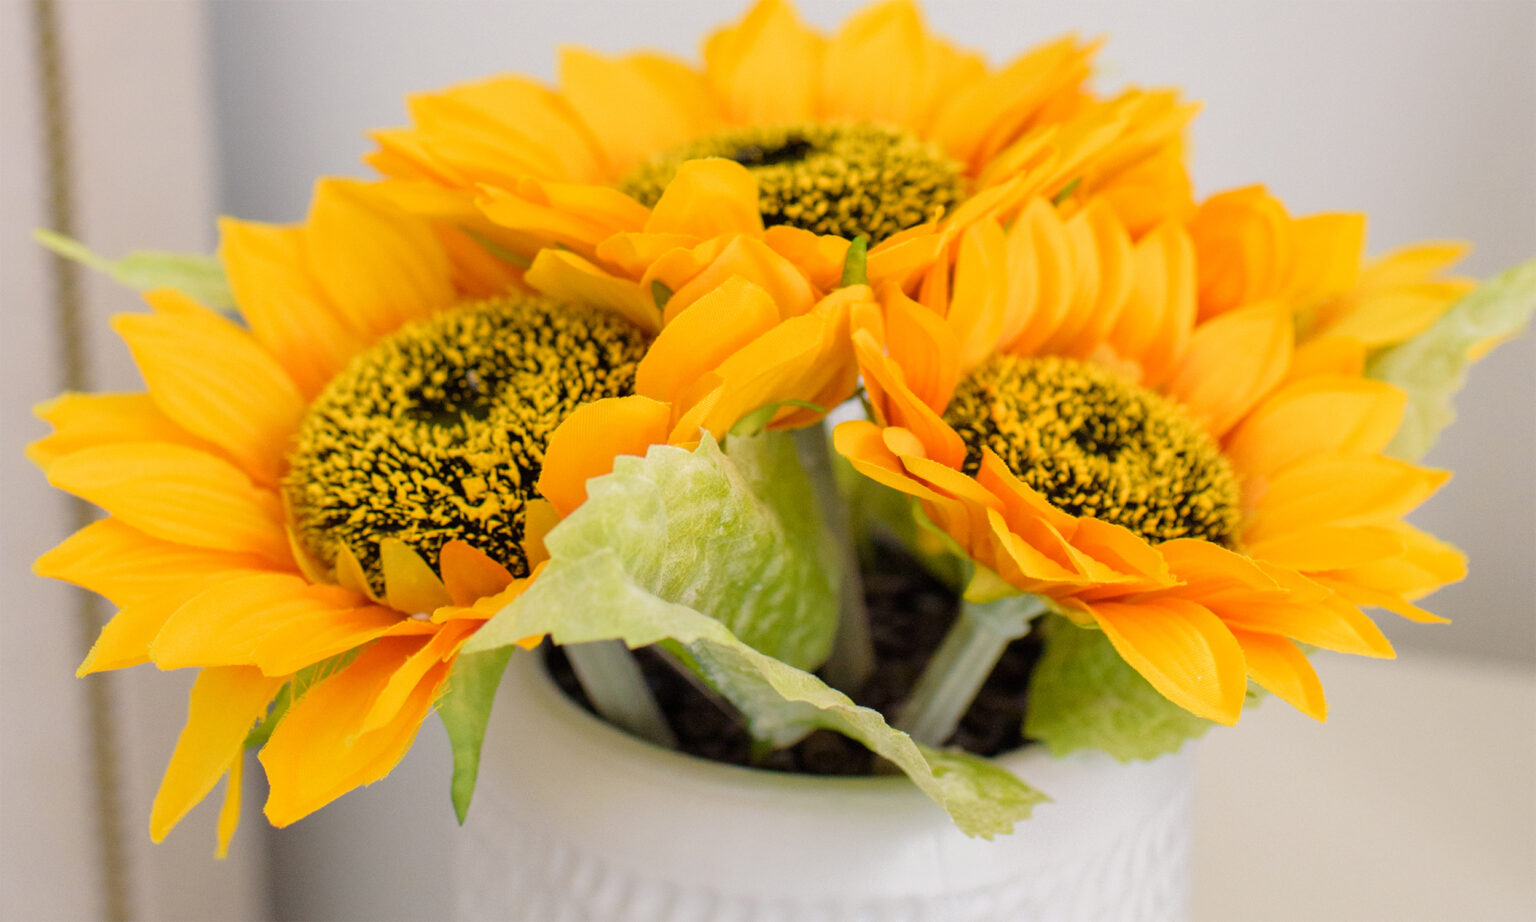 Bouquet of bright yellow sunflowers